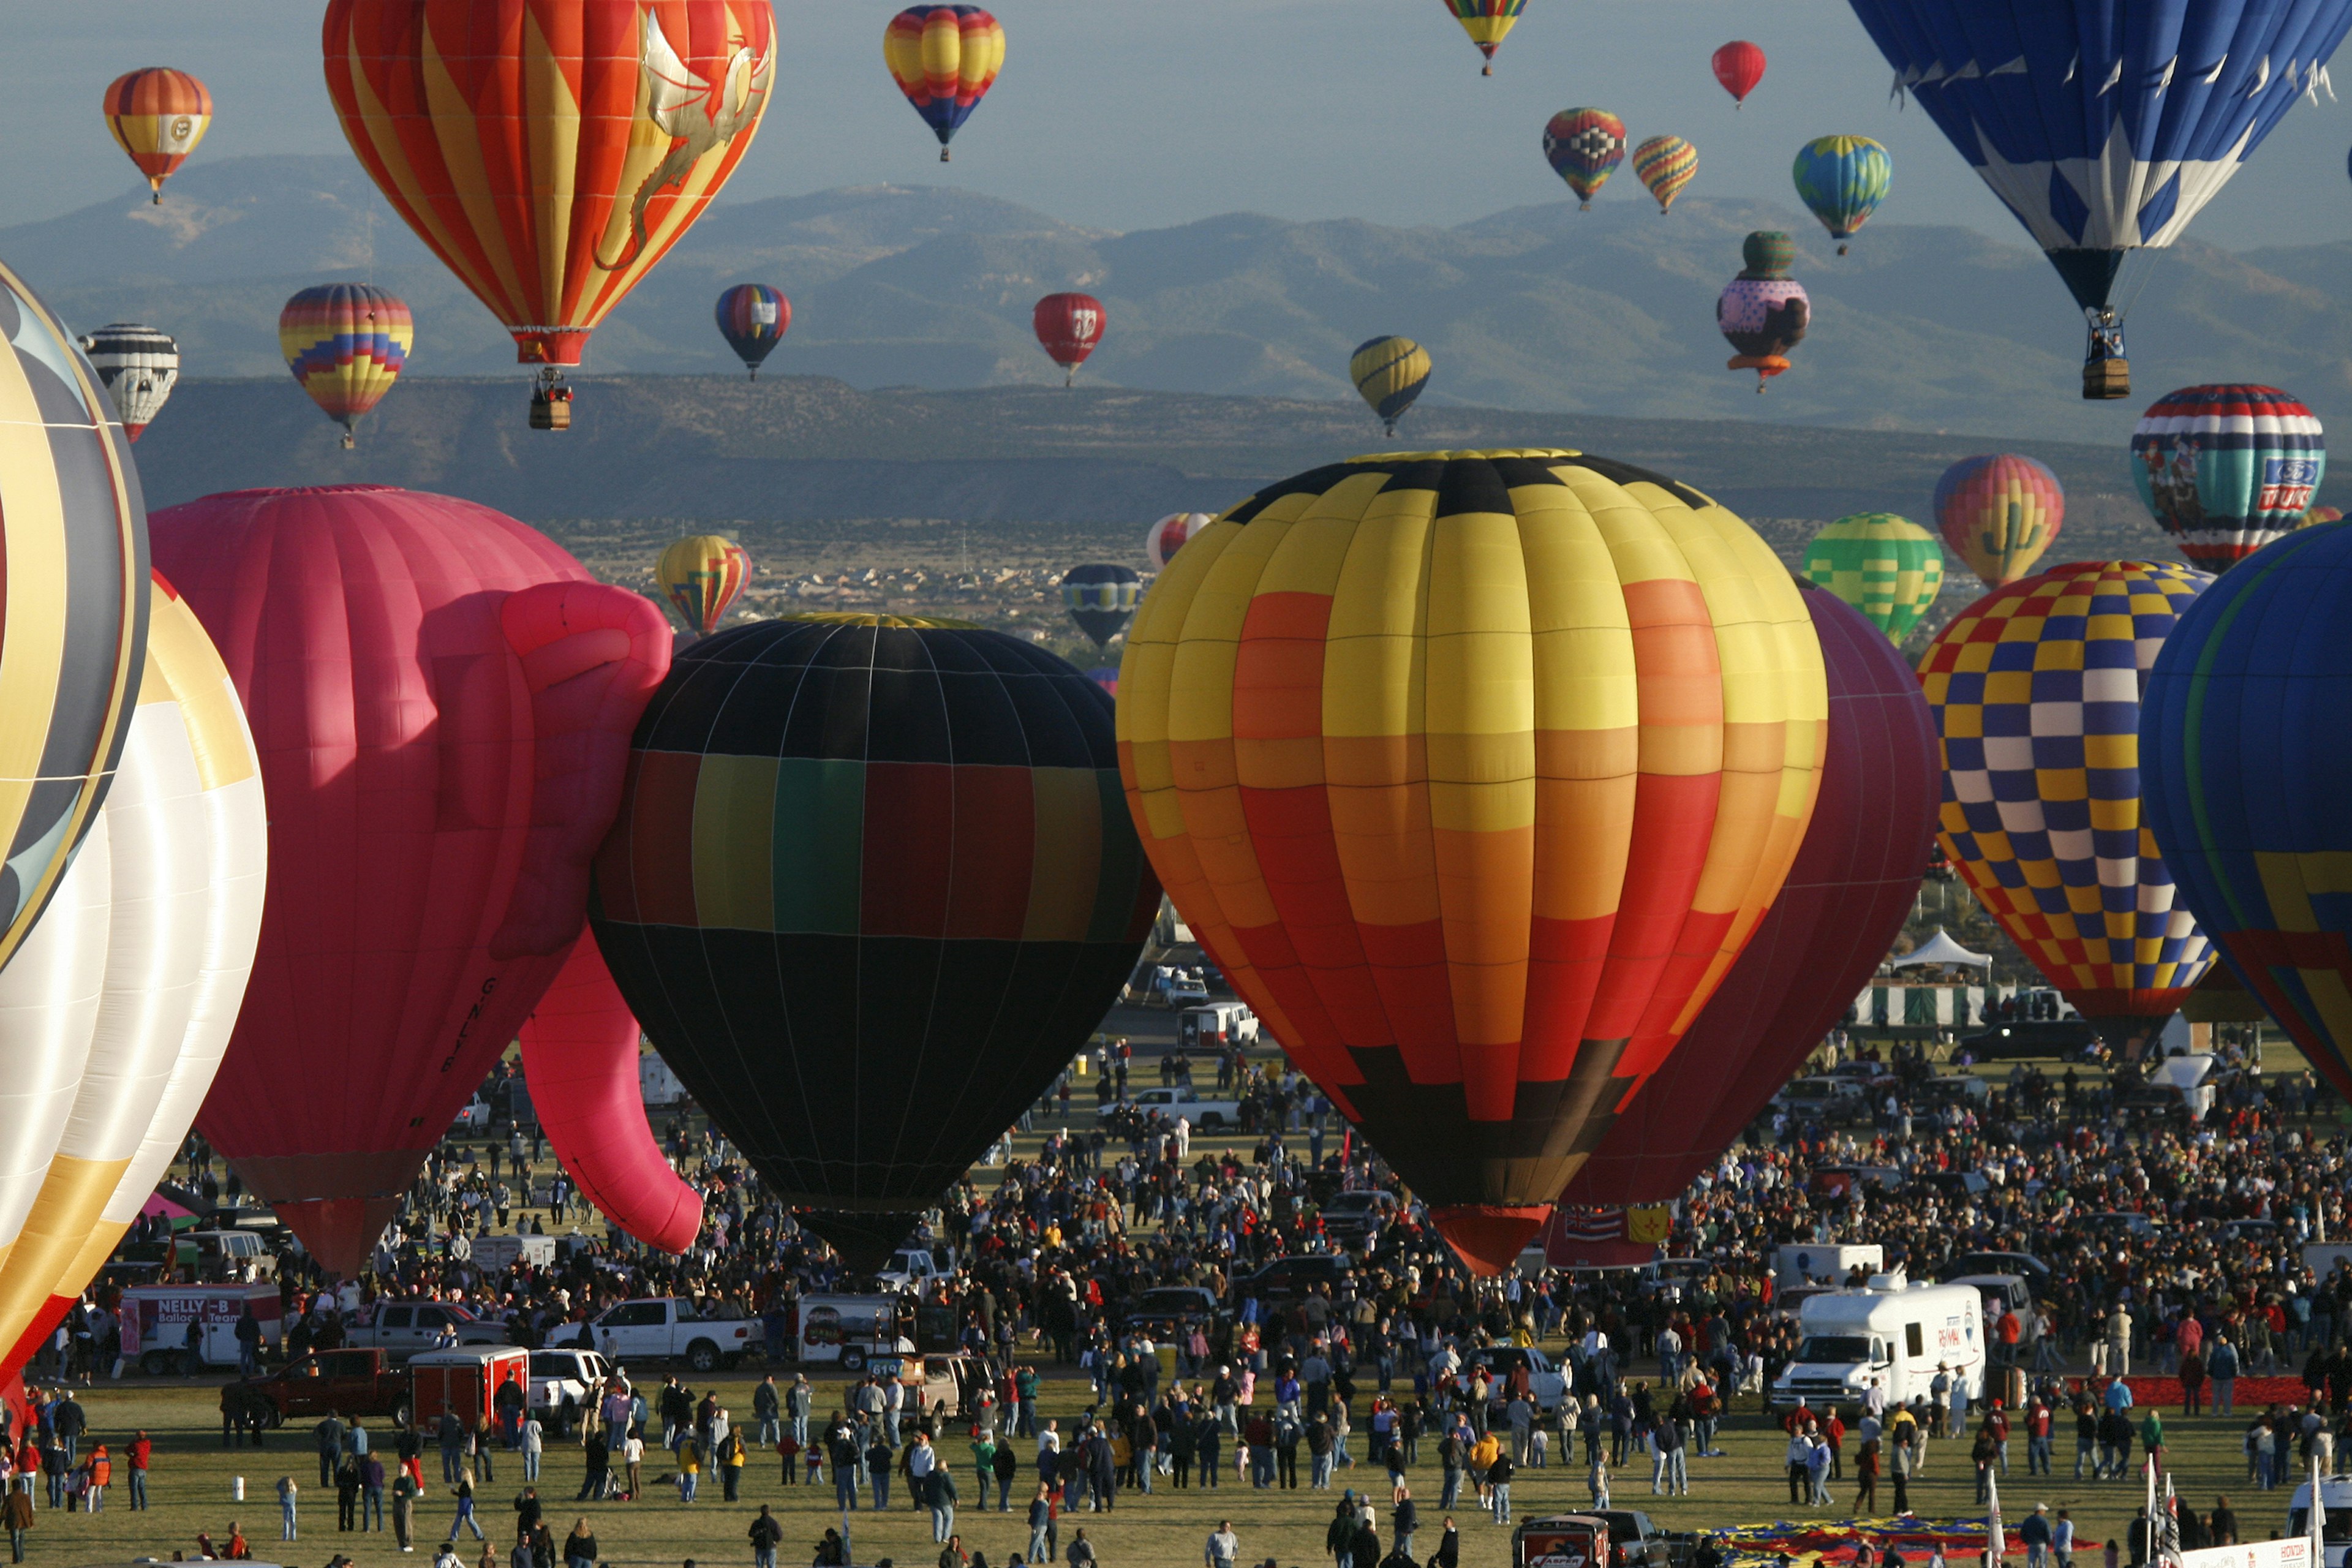 "Albuquerque, USA - October 12, 2007: Mass ascension of hot air balloons and crowd of people in the early morning at Balloon Fiesta Park. The Albuquerque International Balloon Fiesta is a world-renowned attraction with over 600 balloons and crowds for some events in excess of 100,000 people."